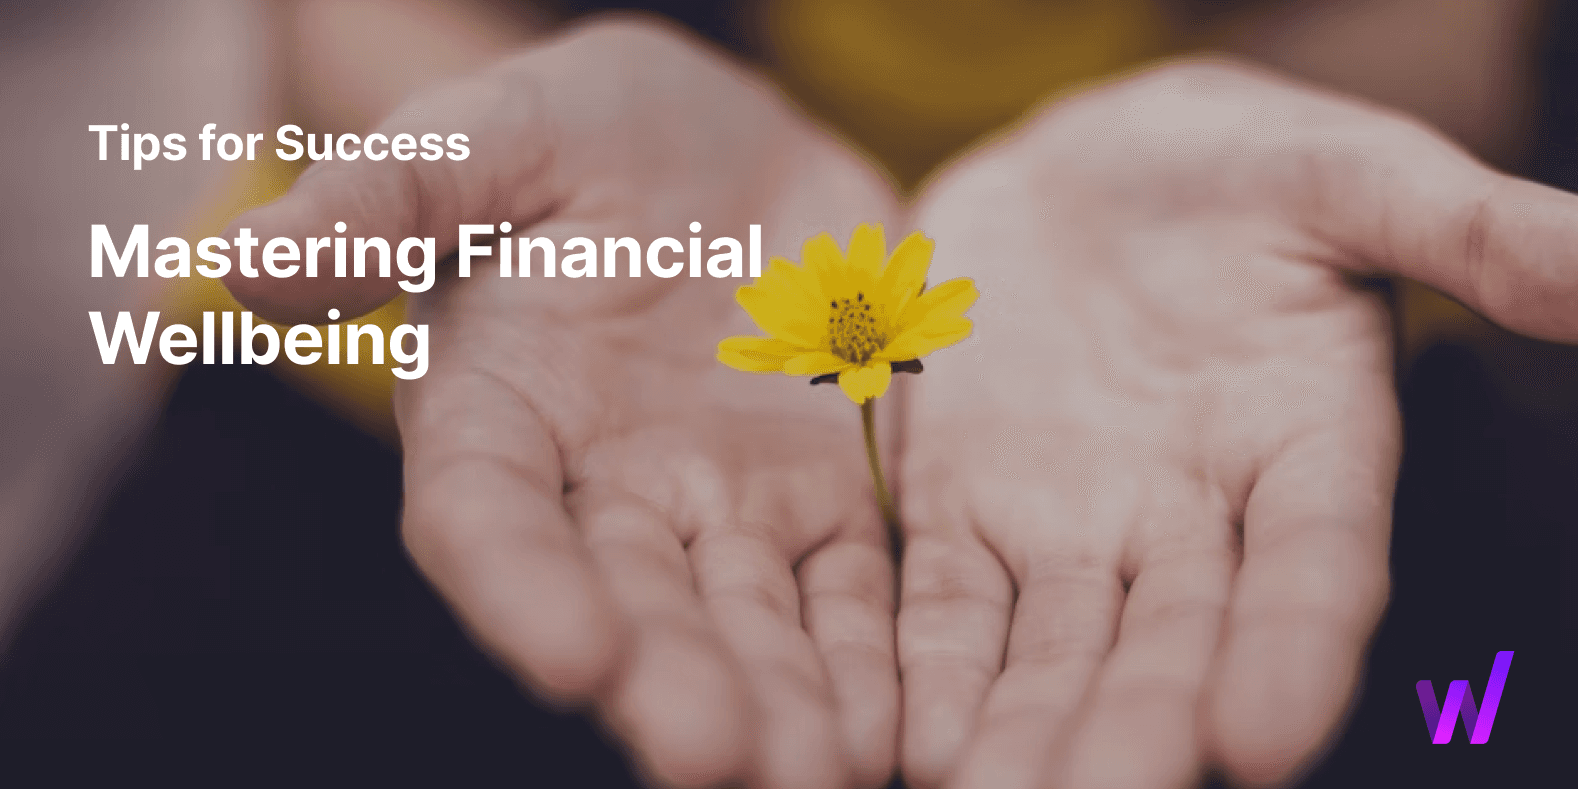 Mastering Financial Wellbeing: Tips for Success